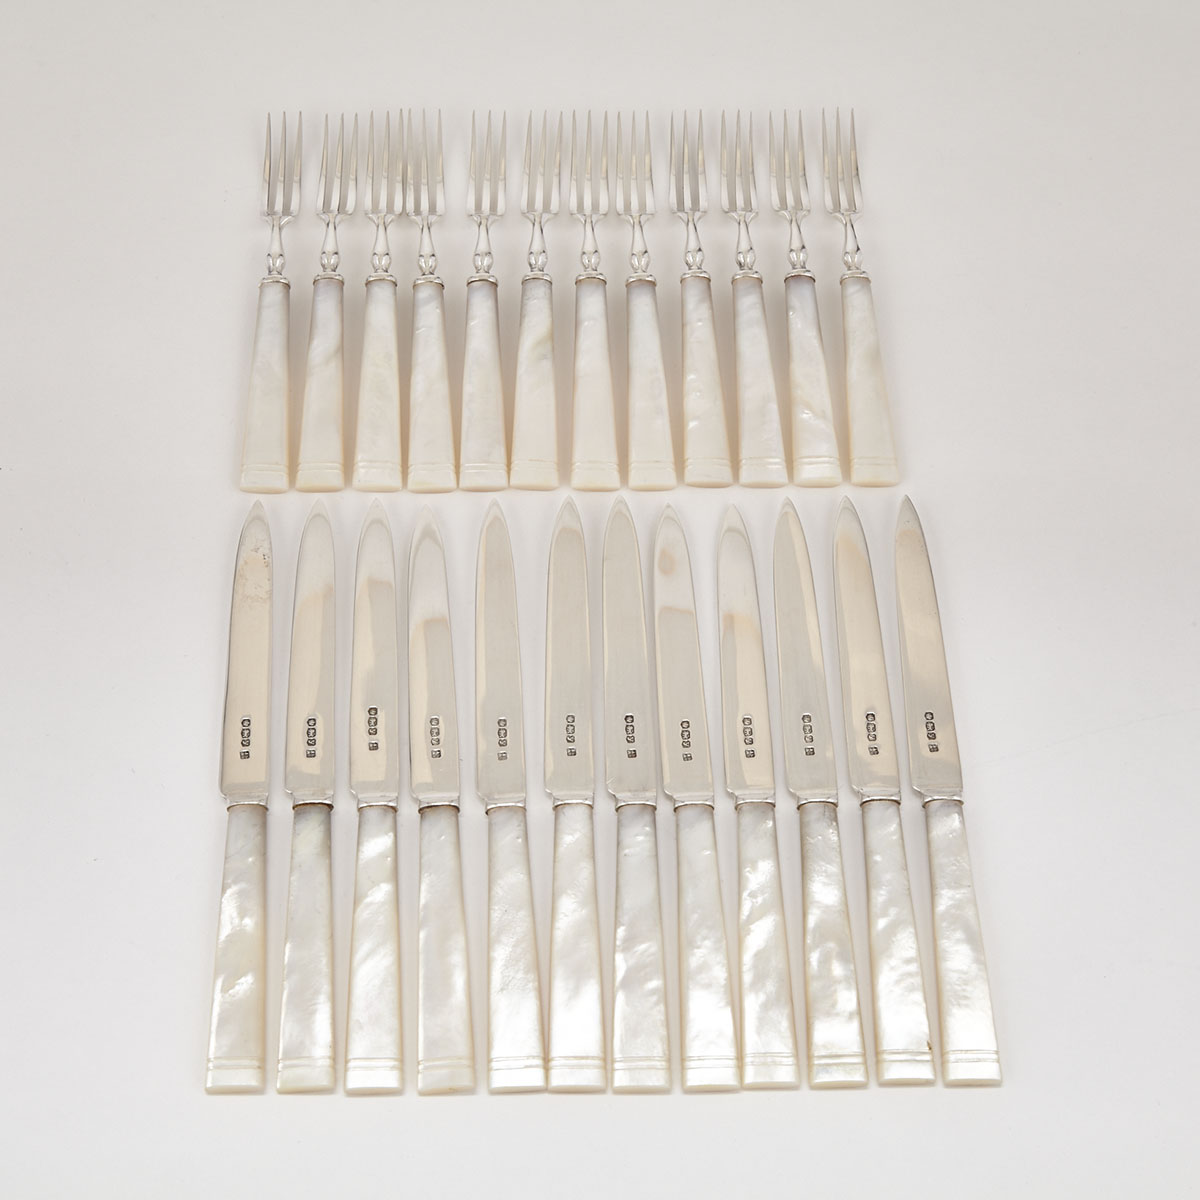 Twelve English Silver and Mother-of Pearl Fruit Knives and Forks, John Sanderson & Son, Sheffield, 1941